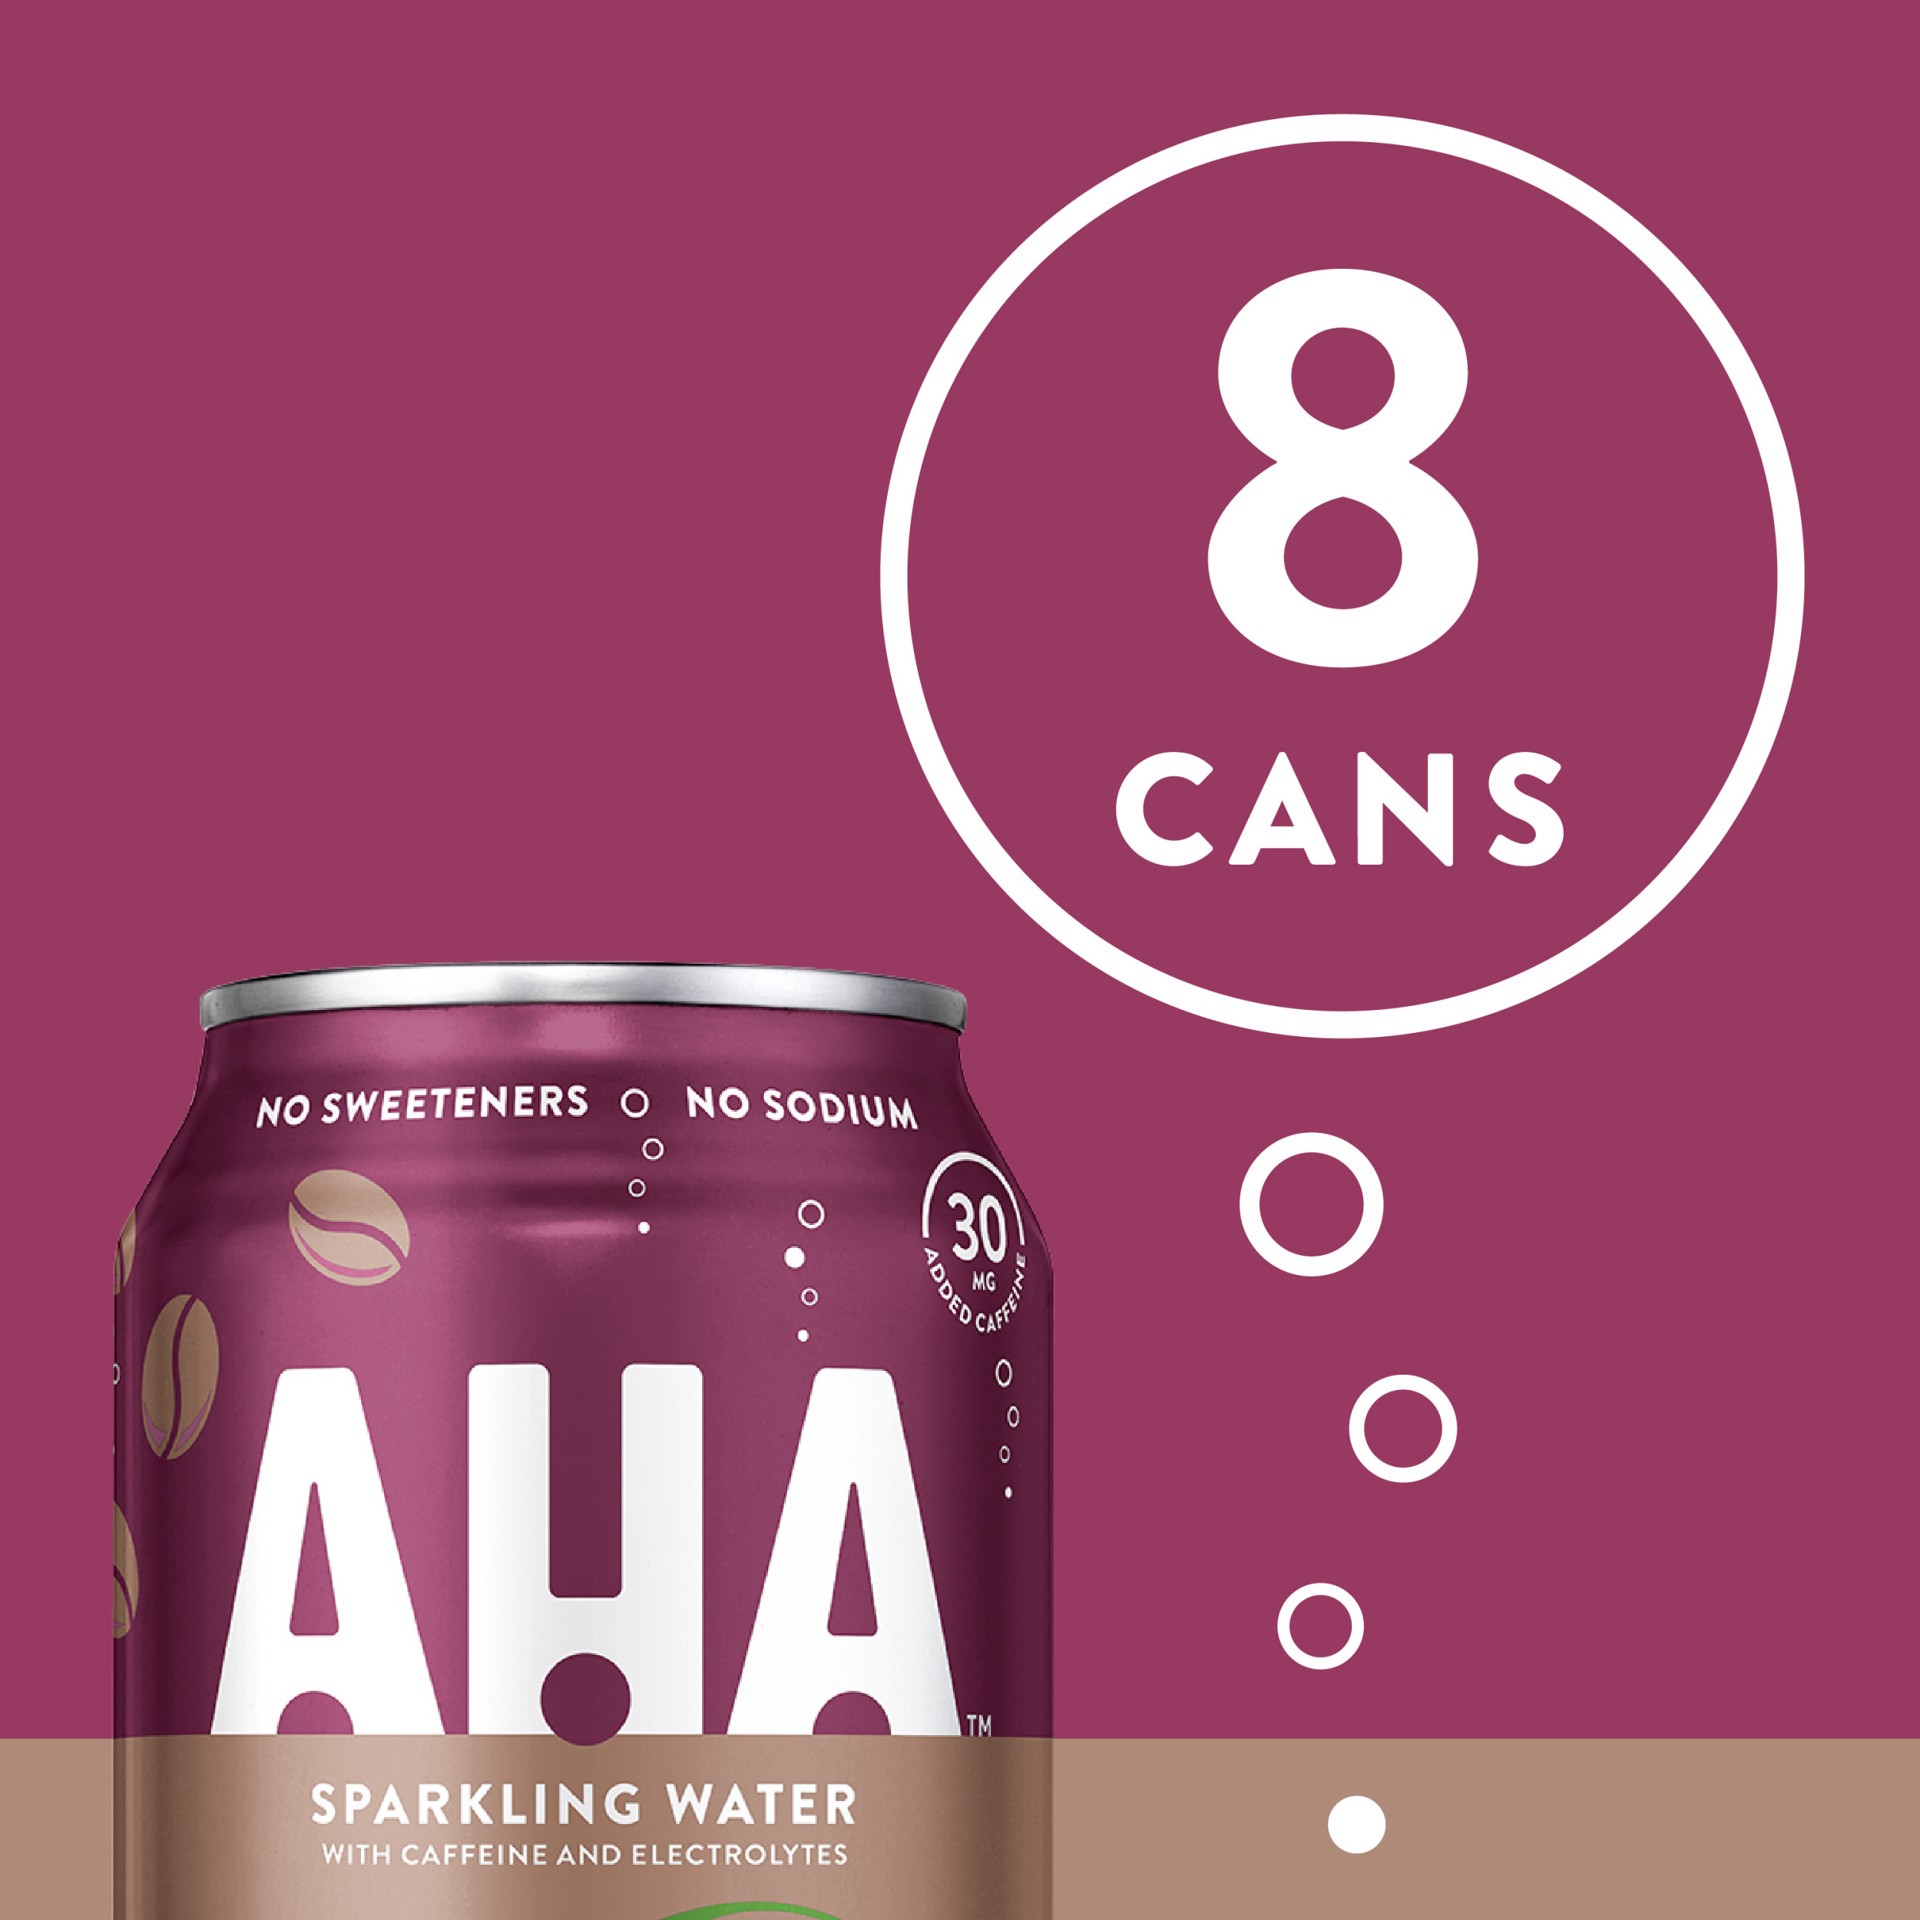 slide 5 of 10, AHA Sparkling Water, Black Cherry + Coffee Flavored Water, with Caffeine & Electrolytes, Zero Calories, Sodium Free, No Sweeteners, 12 fl oz, 8 Pack, 8 ct; 12 fl oz